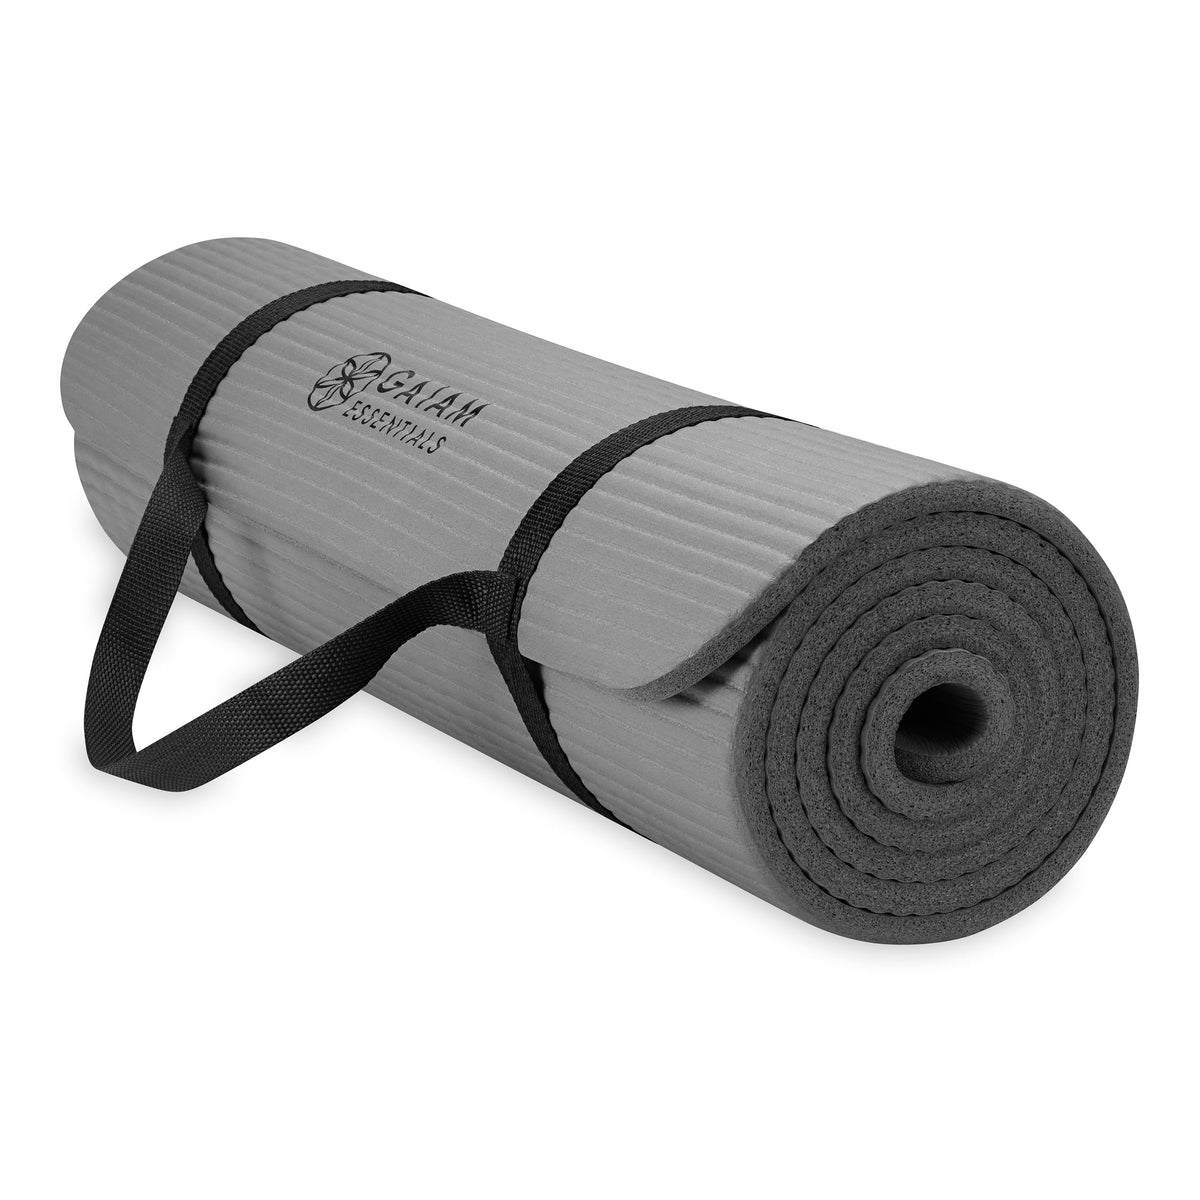 Evolve by Gaiam Yoga Mat Sling, Black, One-size (Yoga Mat Not Included)